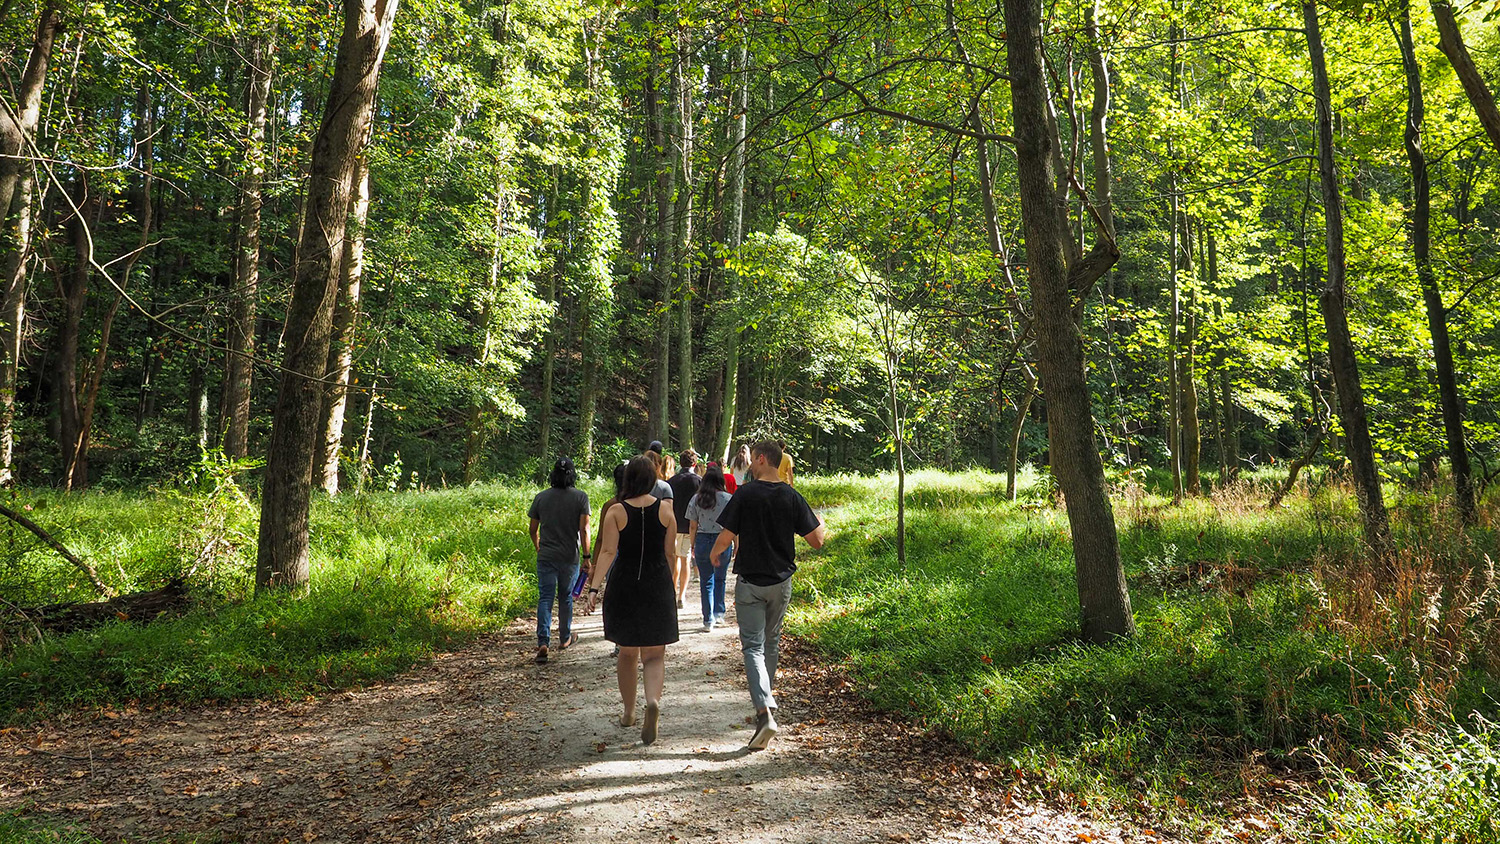 Students walk through the forest at the NC Art Museum park